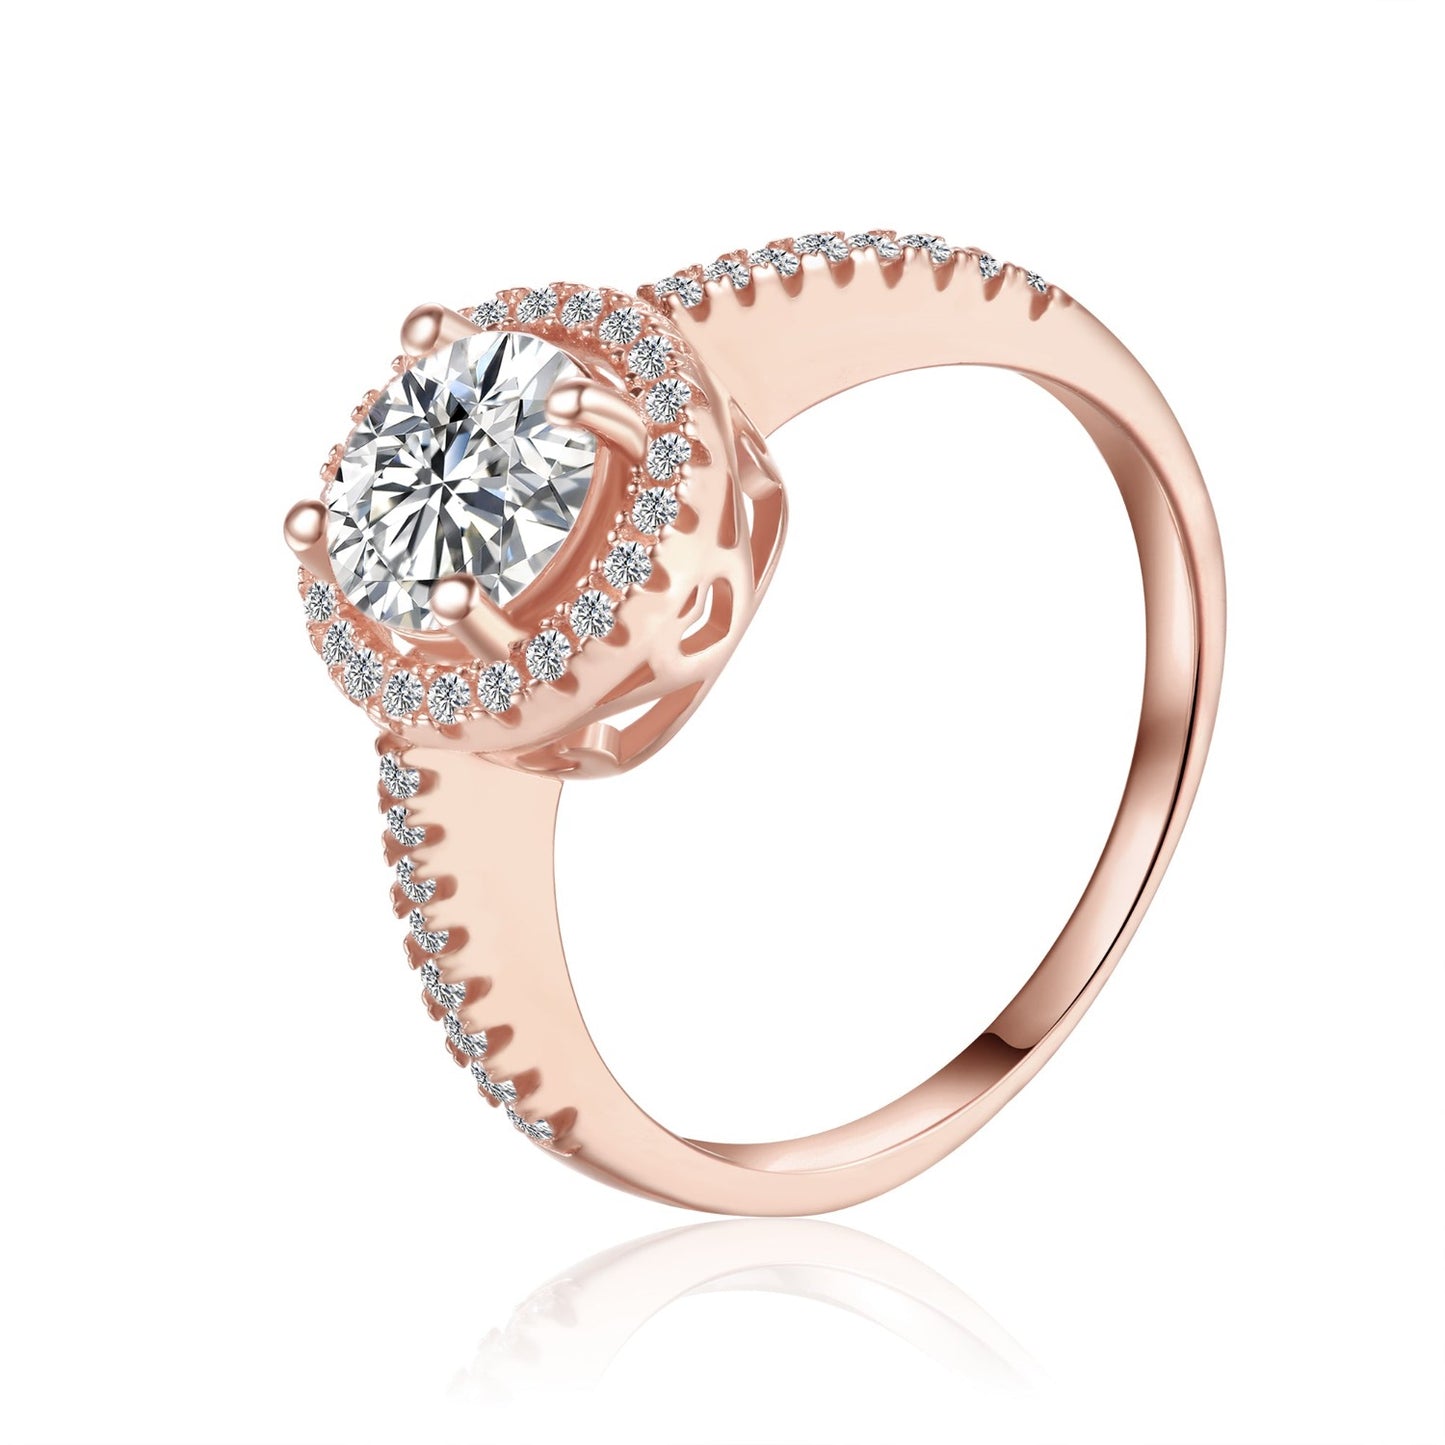 Halo Of Hearts 1.00ct Moissanite Engagement Ring Set in 9ct Rose Gold